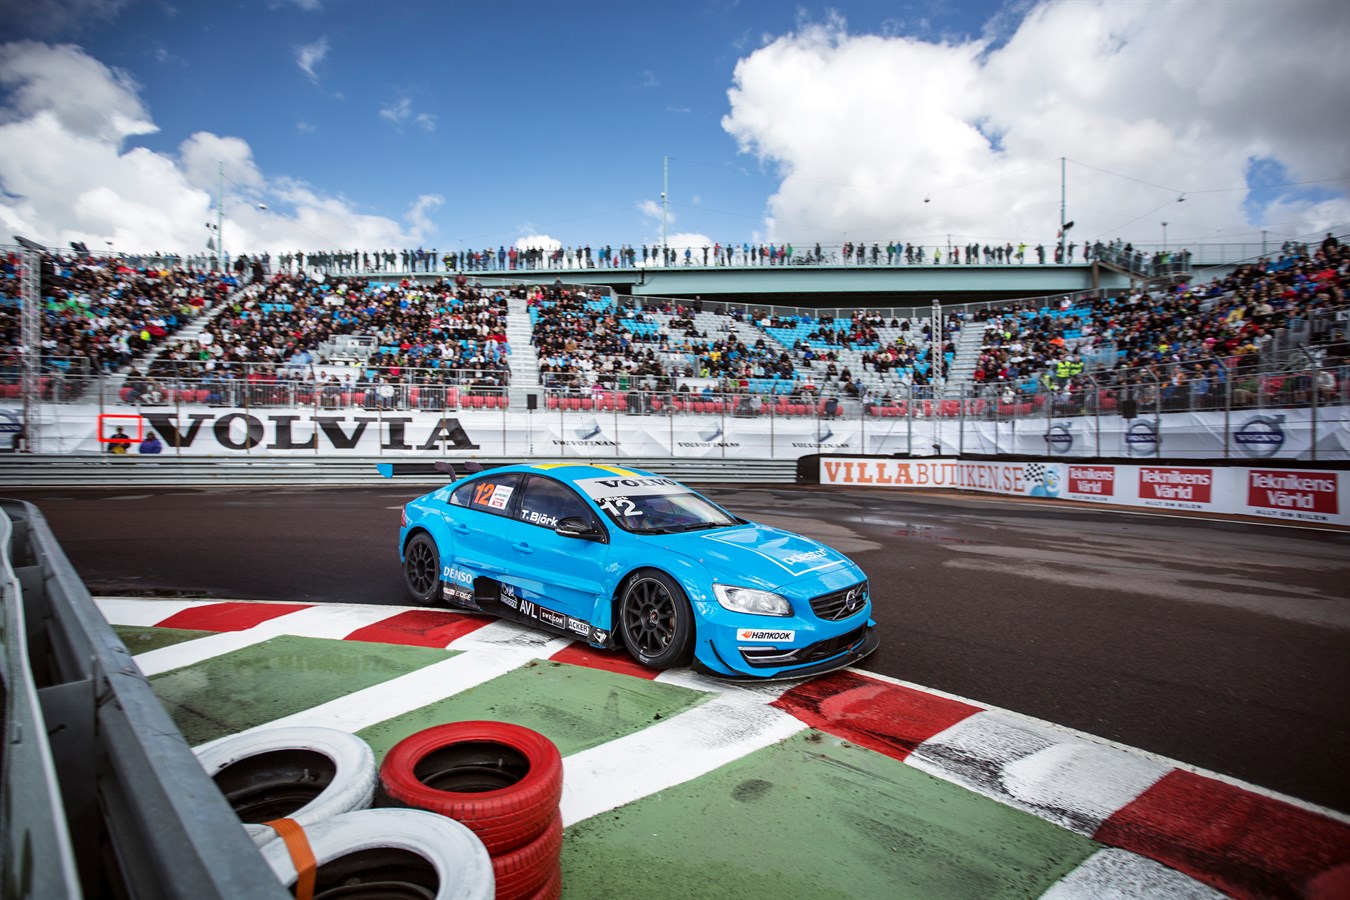 Third straight STCC win for Thed Björk and Volvo Polestar Racing